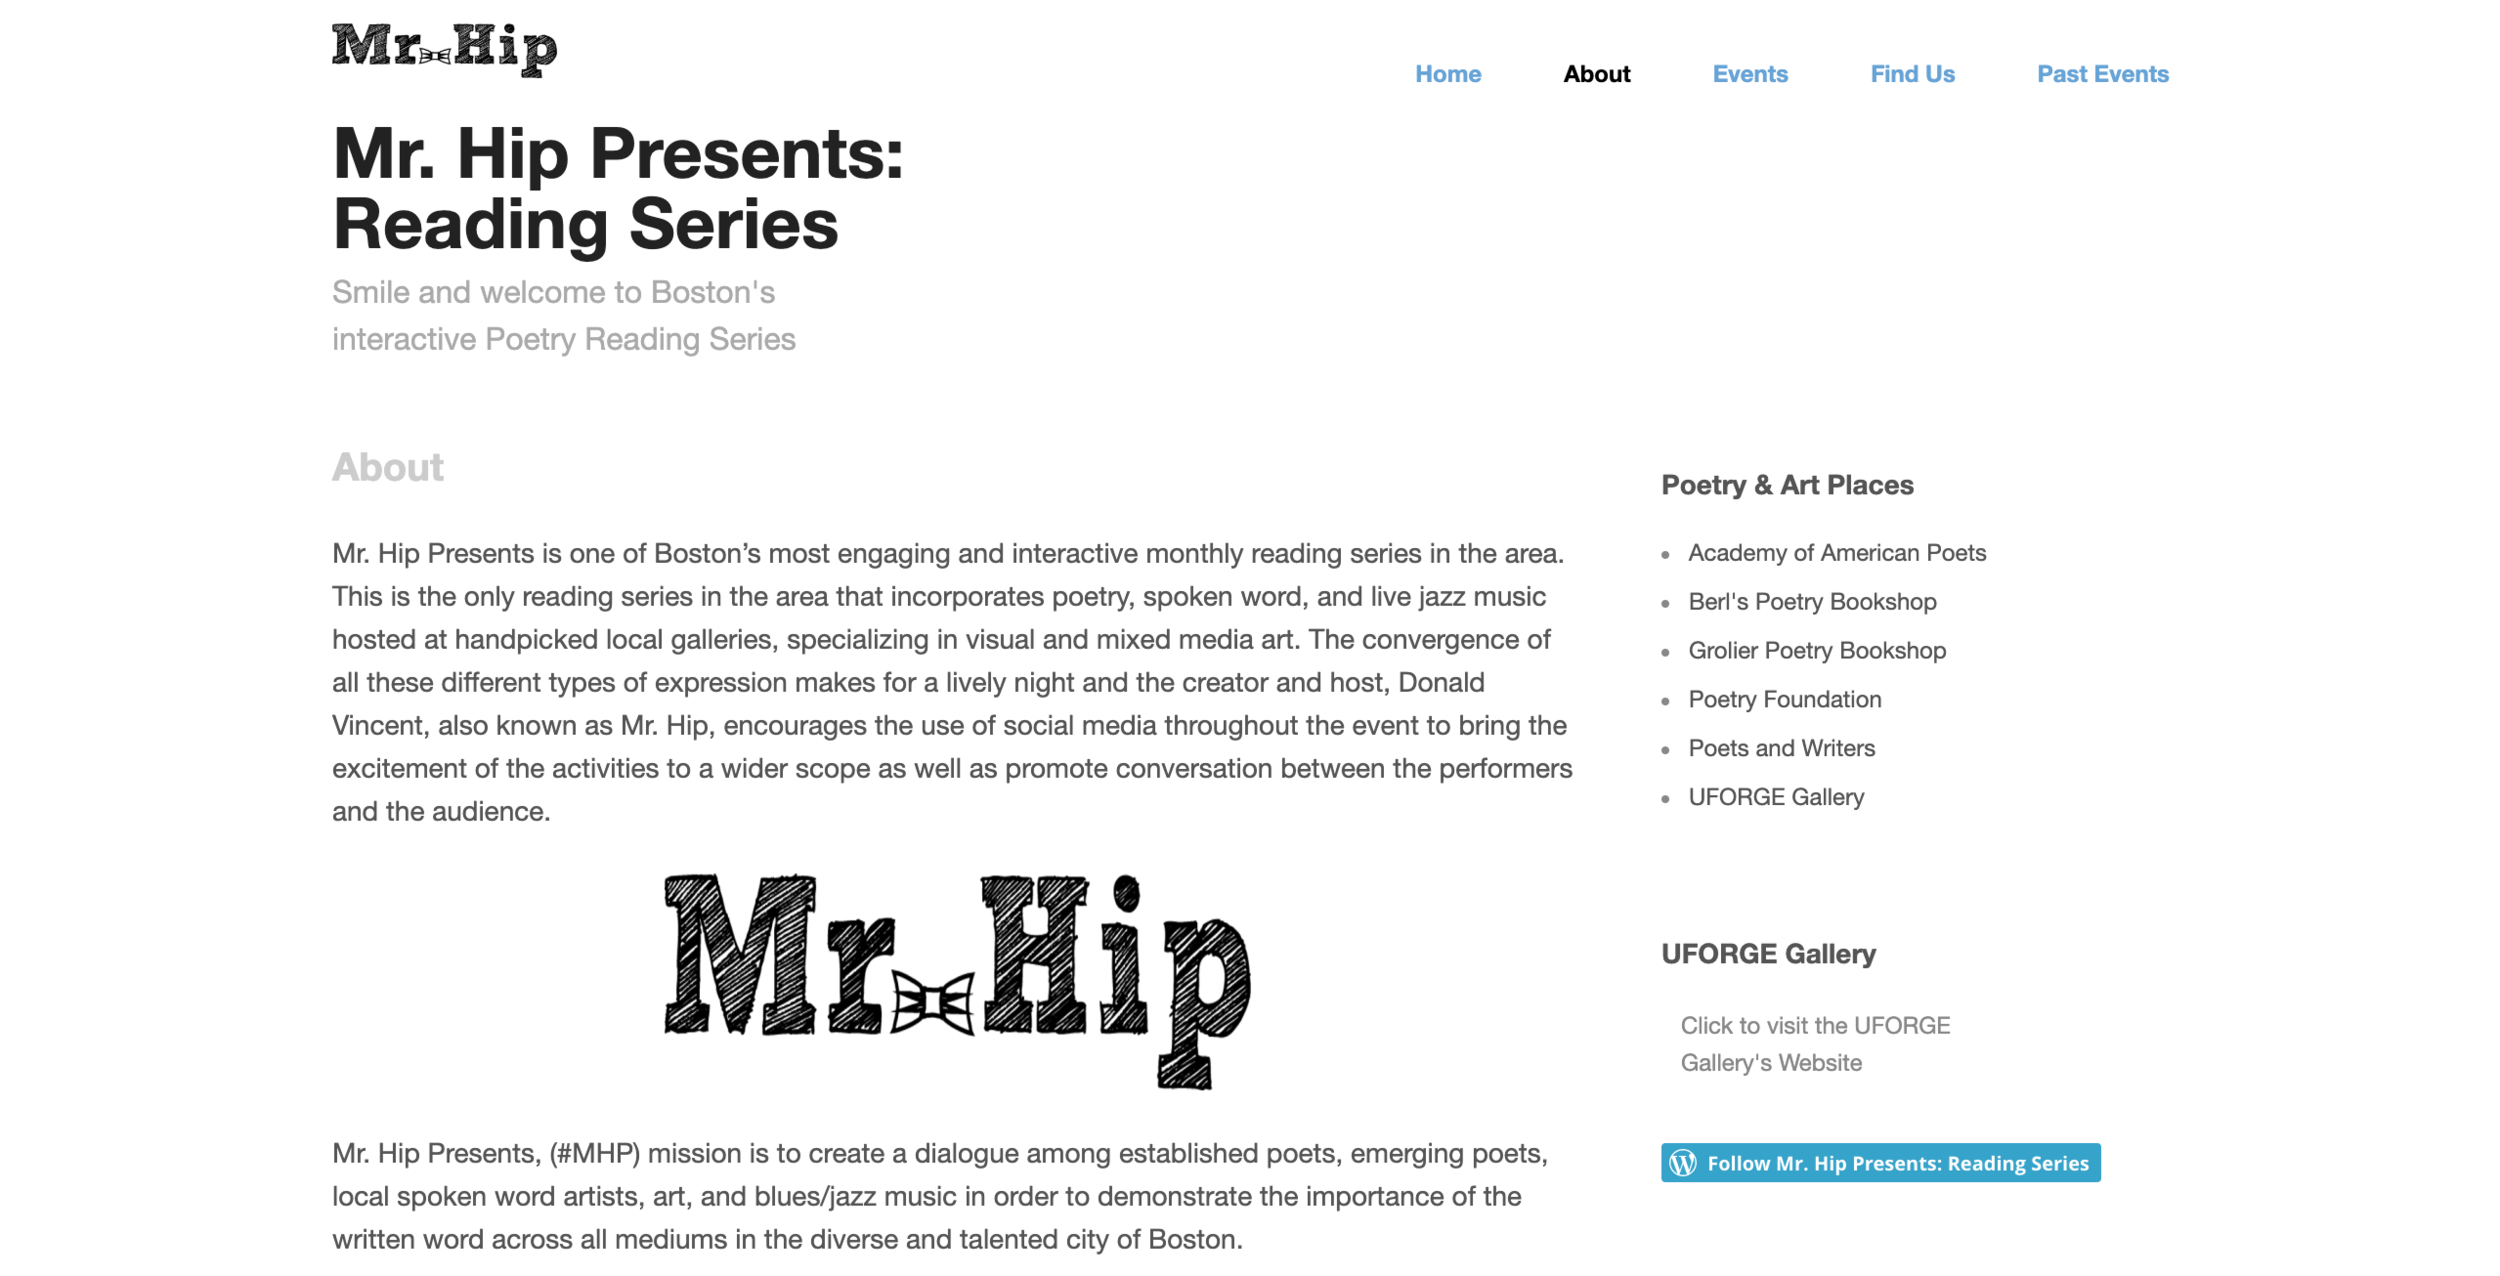 About- Mr. Hip Presents